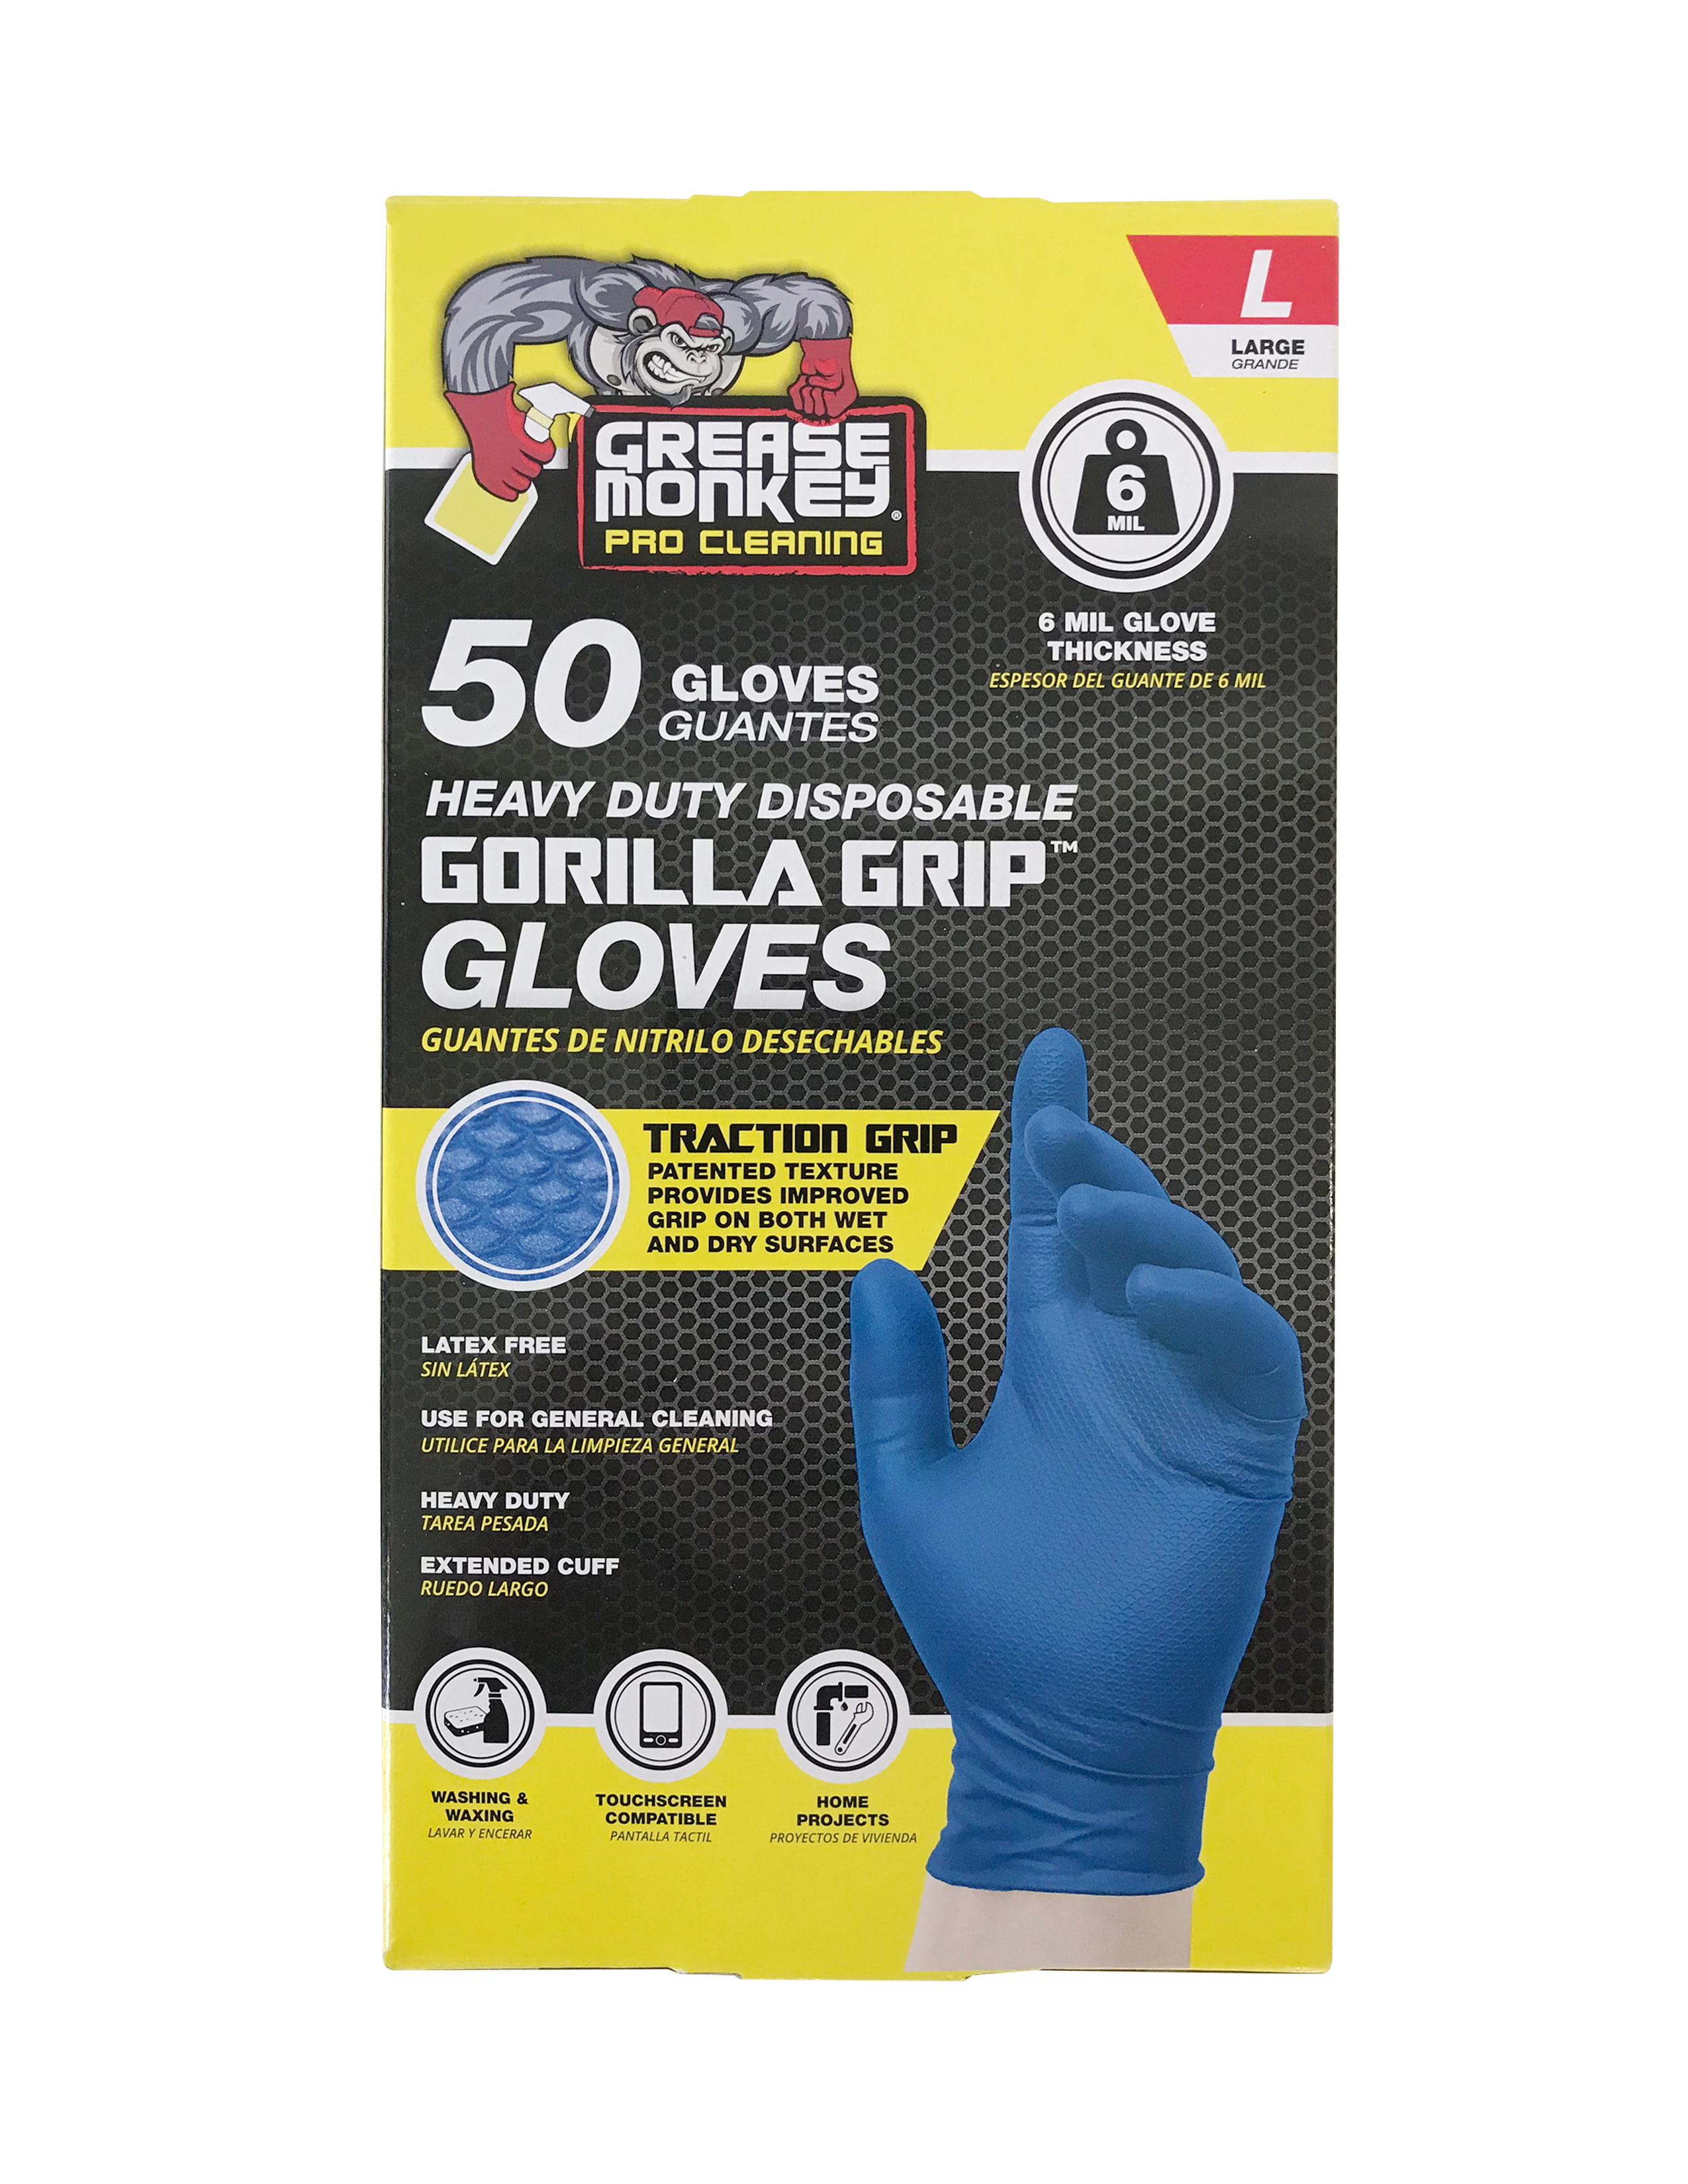 Grease Monkey Gorilla Grip Nitrile Gloves 50Ct USPS PRIORITY SHIPPING 